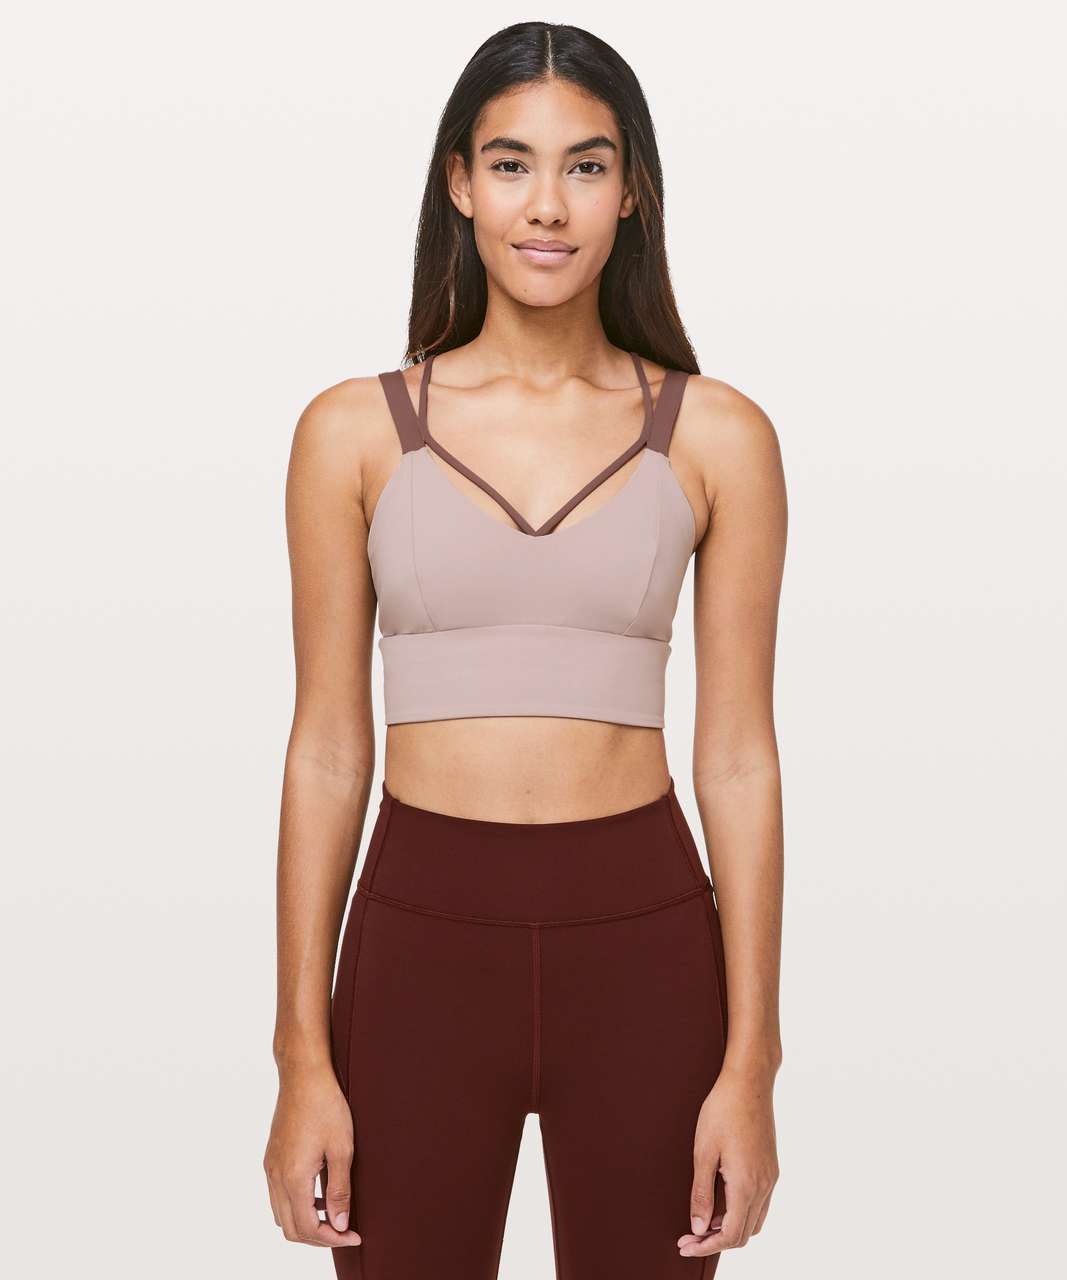 Lululemon Pushing Limits Bra *Light Support For C/D Cup - Smoky Blush / Antique Bark